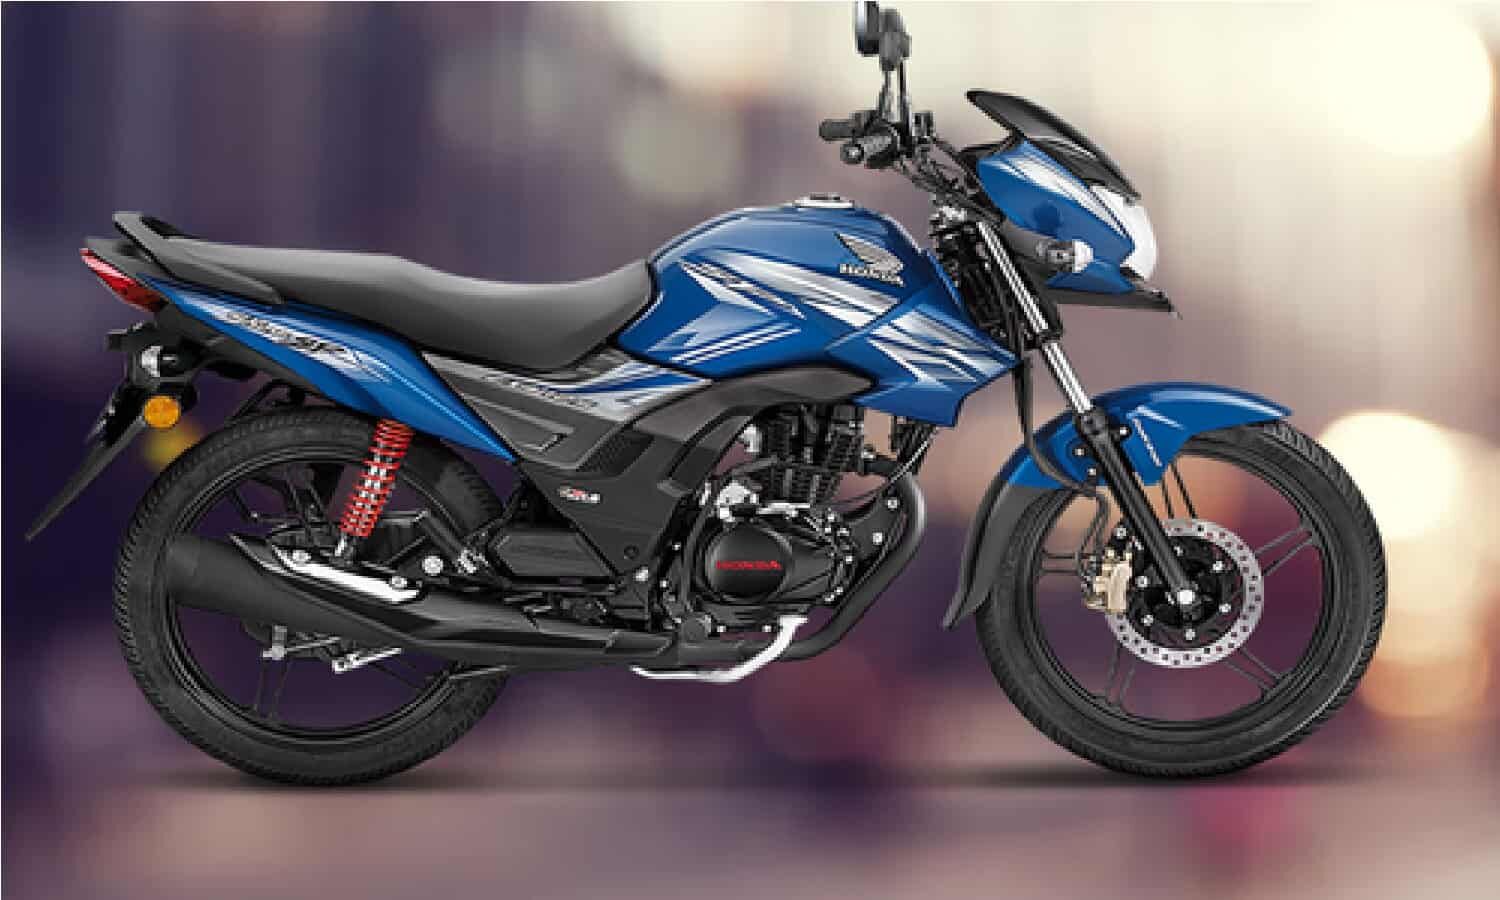 Honda Shine 125 is Available For RS. 17000 Honda Shine 125 is